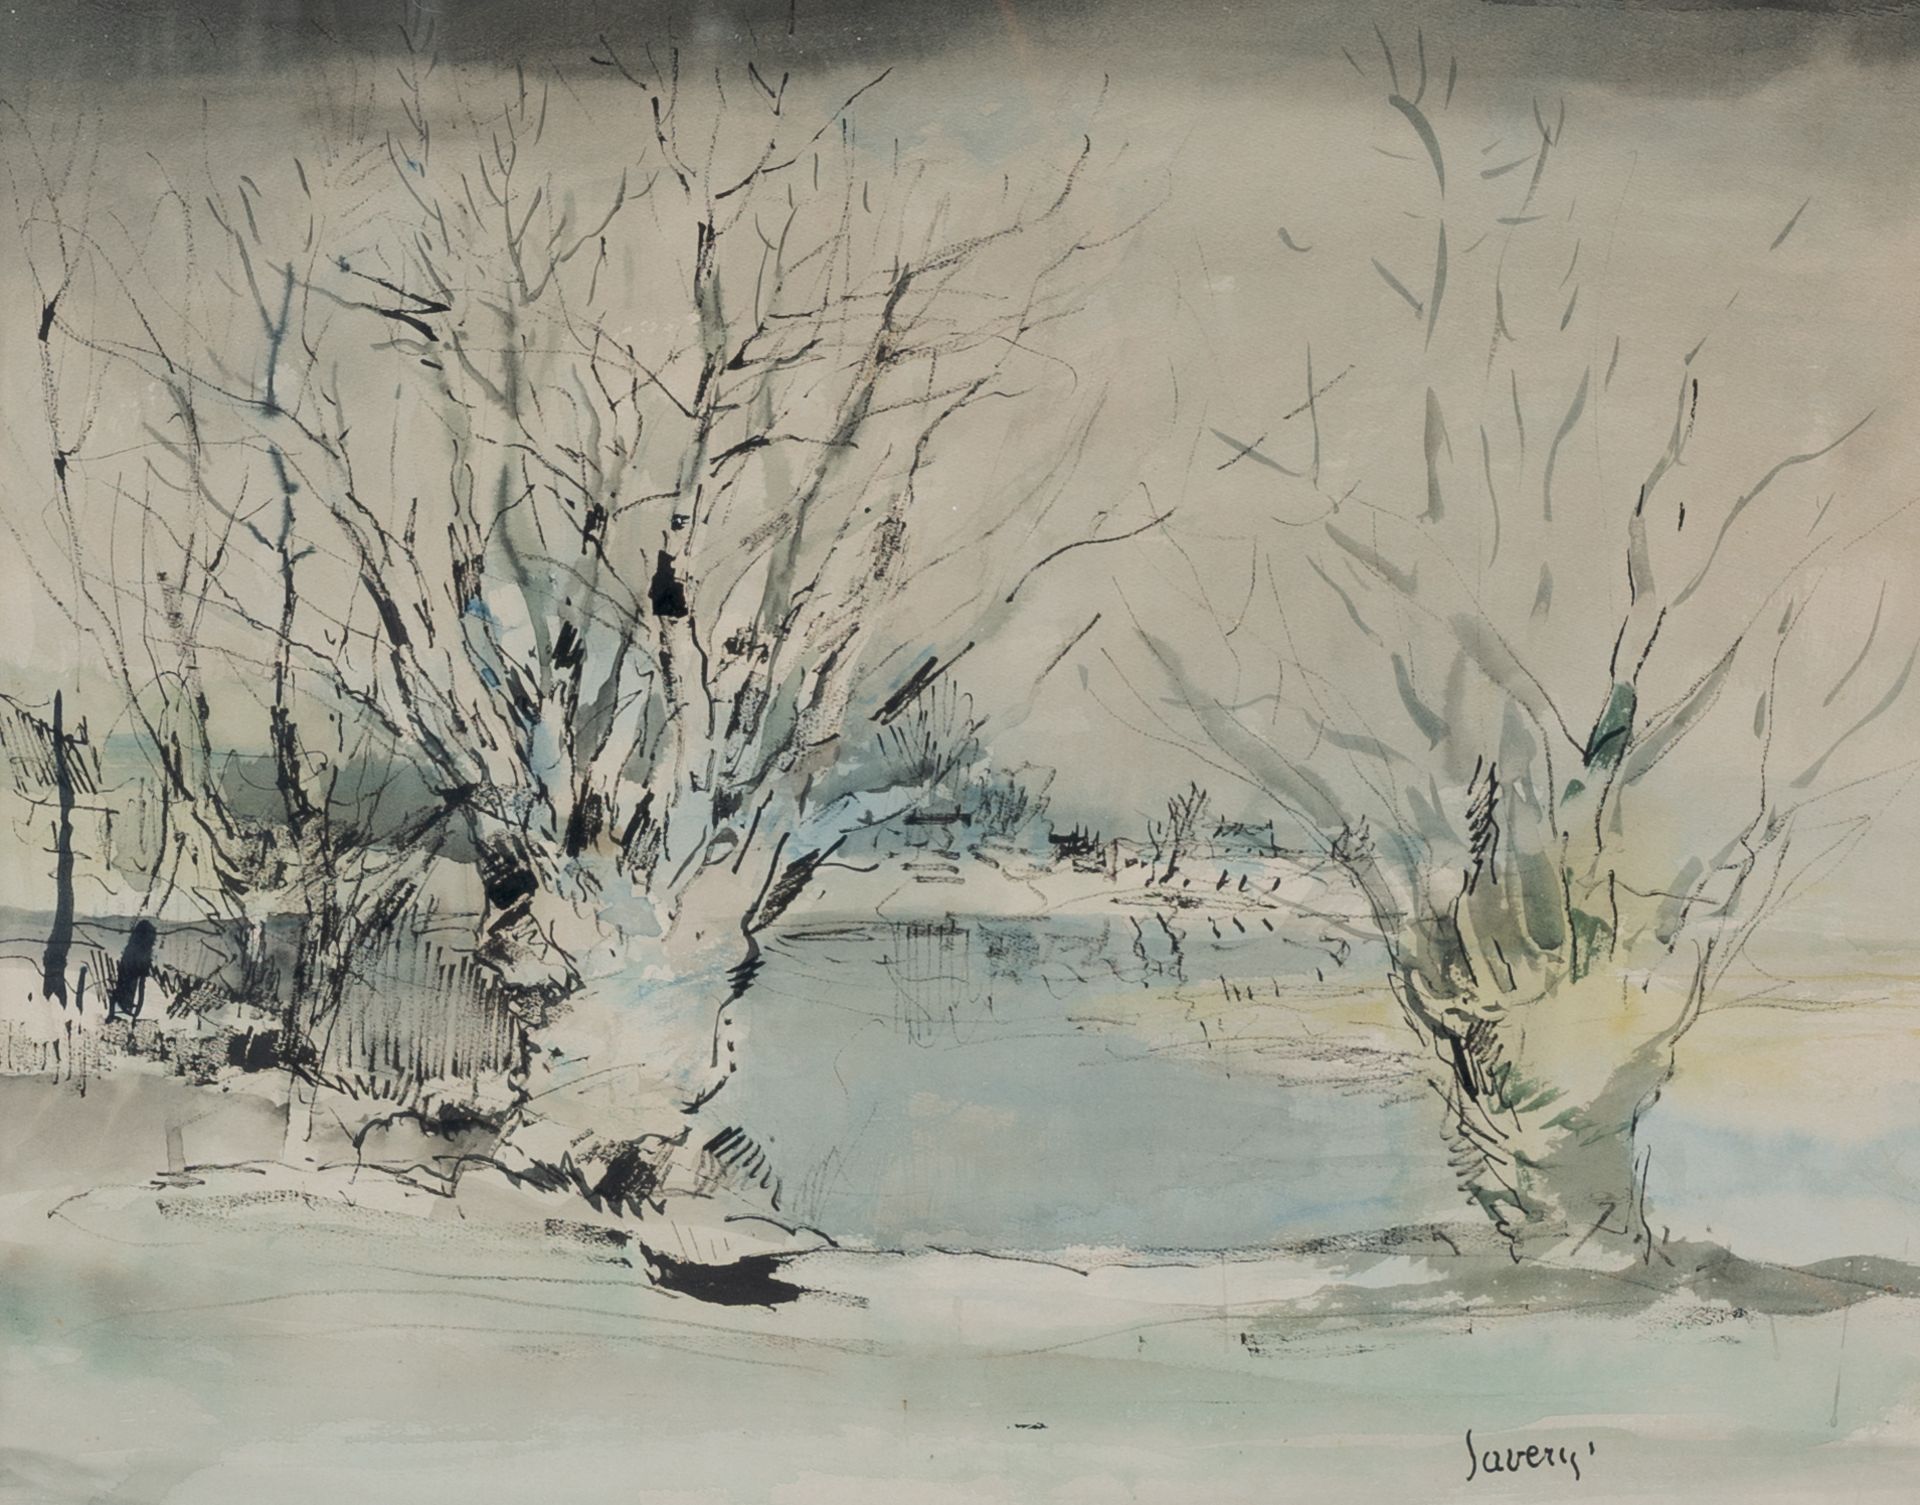 Albert Saverys (1886-1964): Pollard willows along the water's edge, ink and watercolour on paper